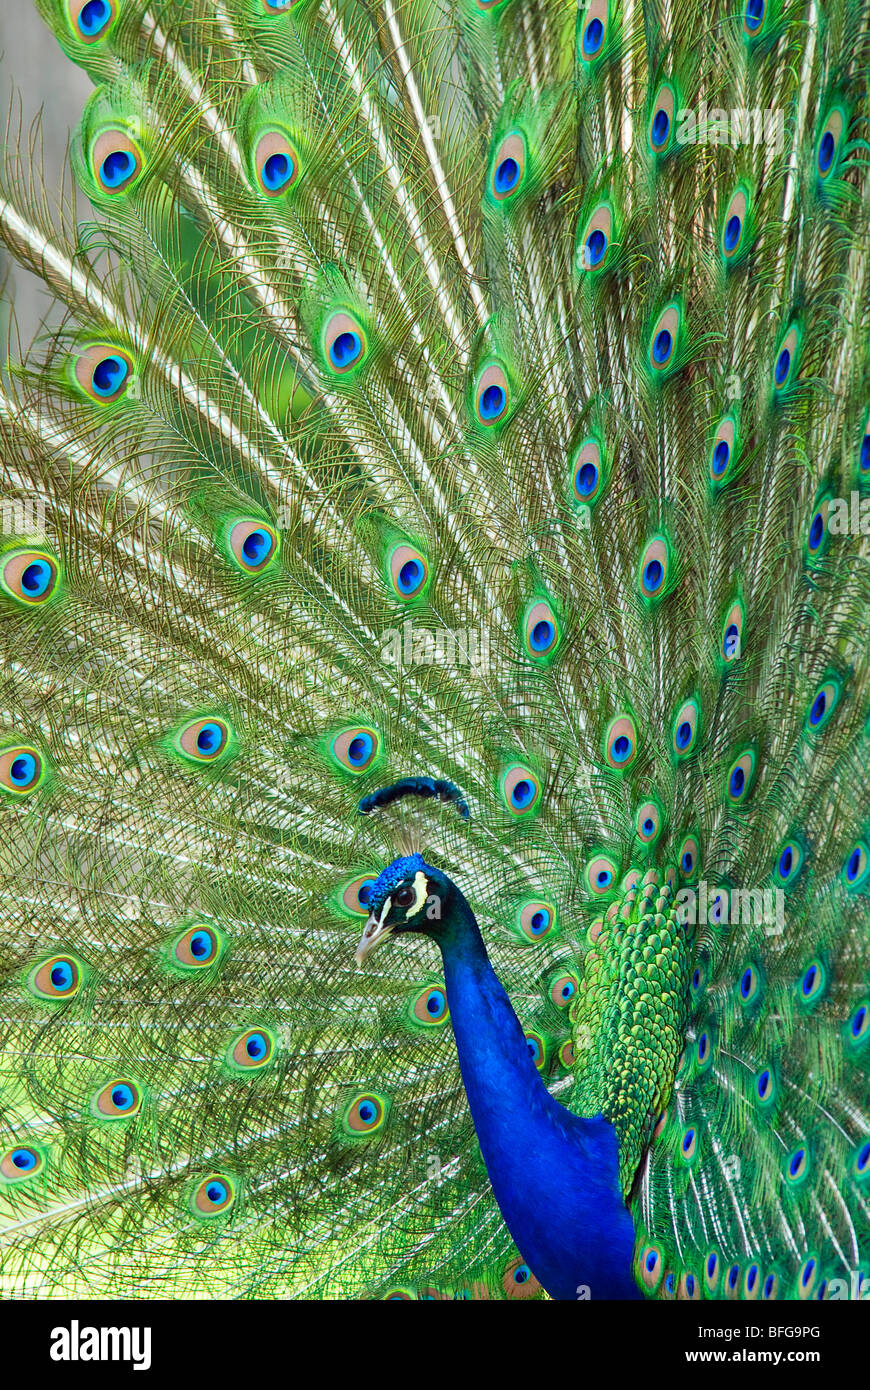 indian blue peacock displaying feathers Stock Photo